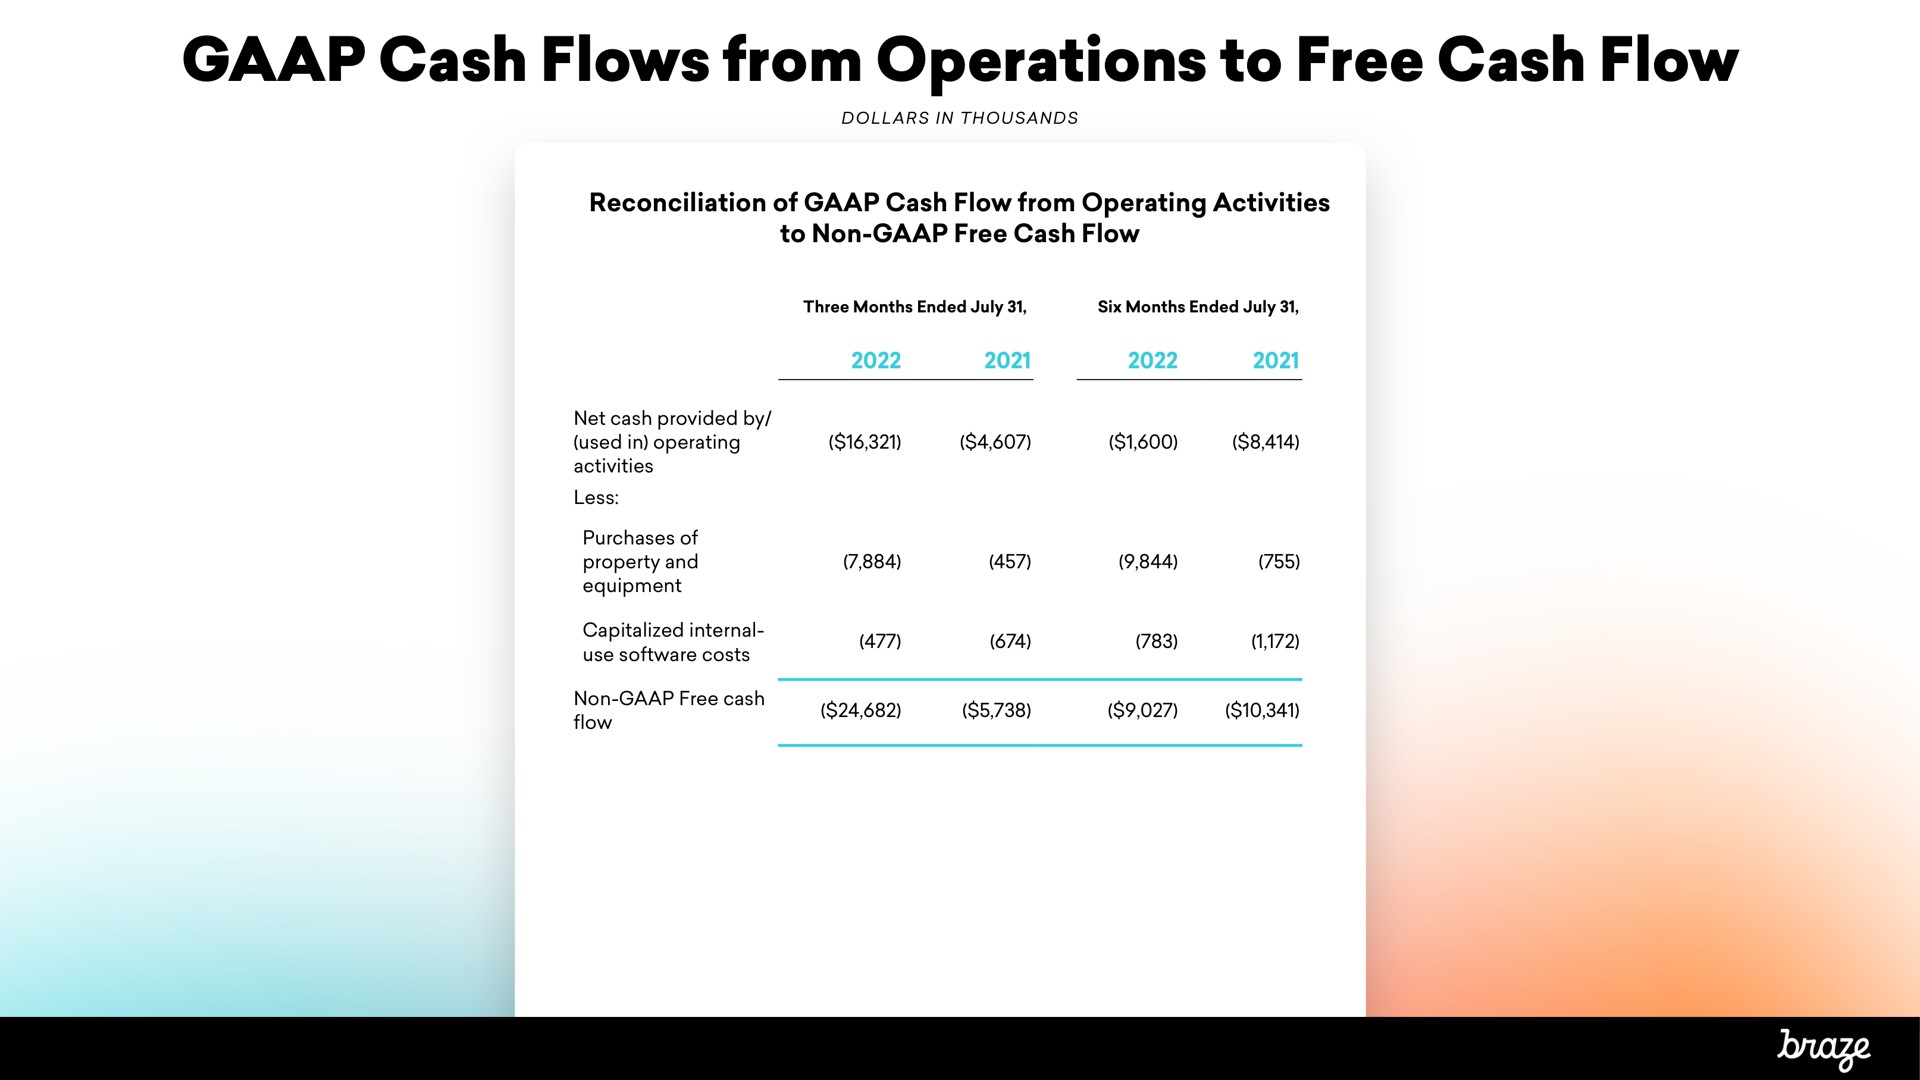 cash flows from operations to free cash flow | Braze